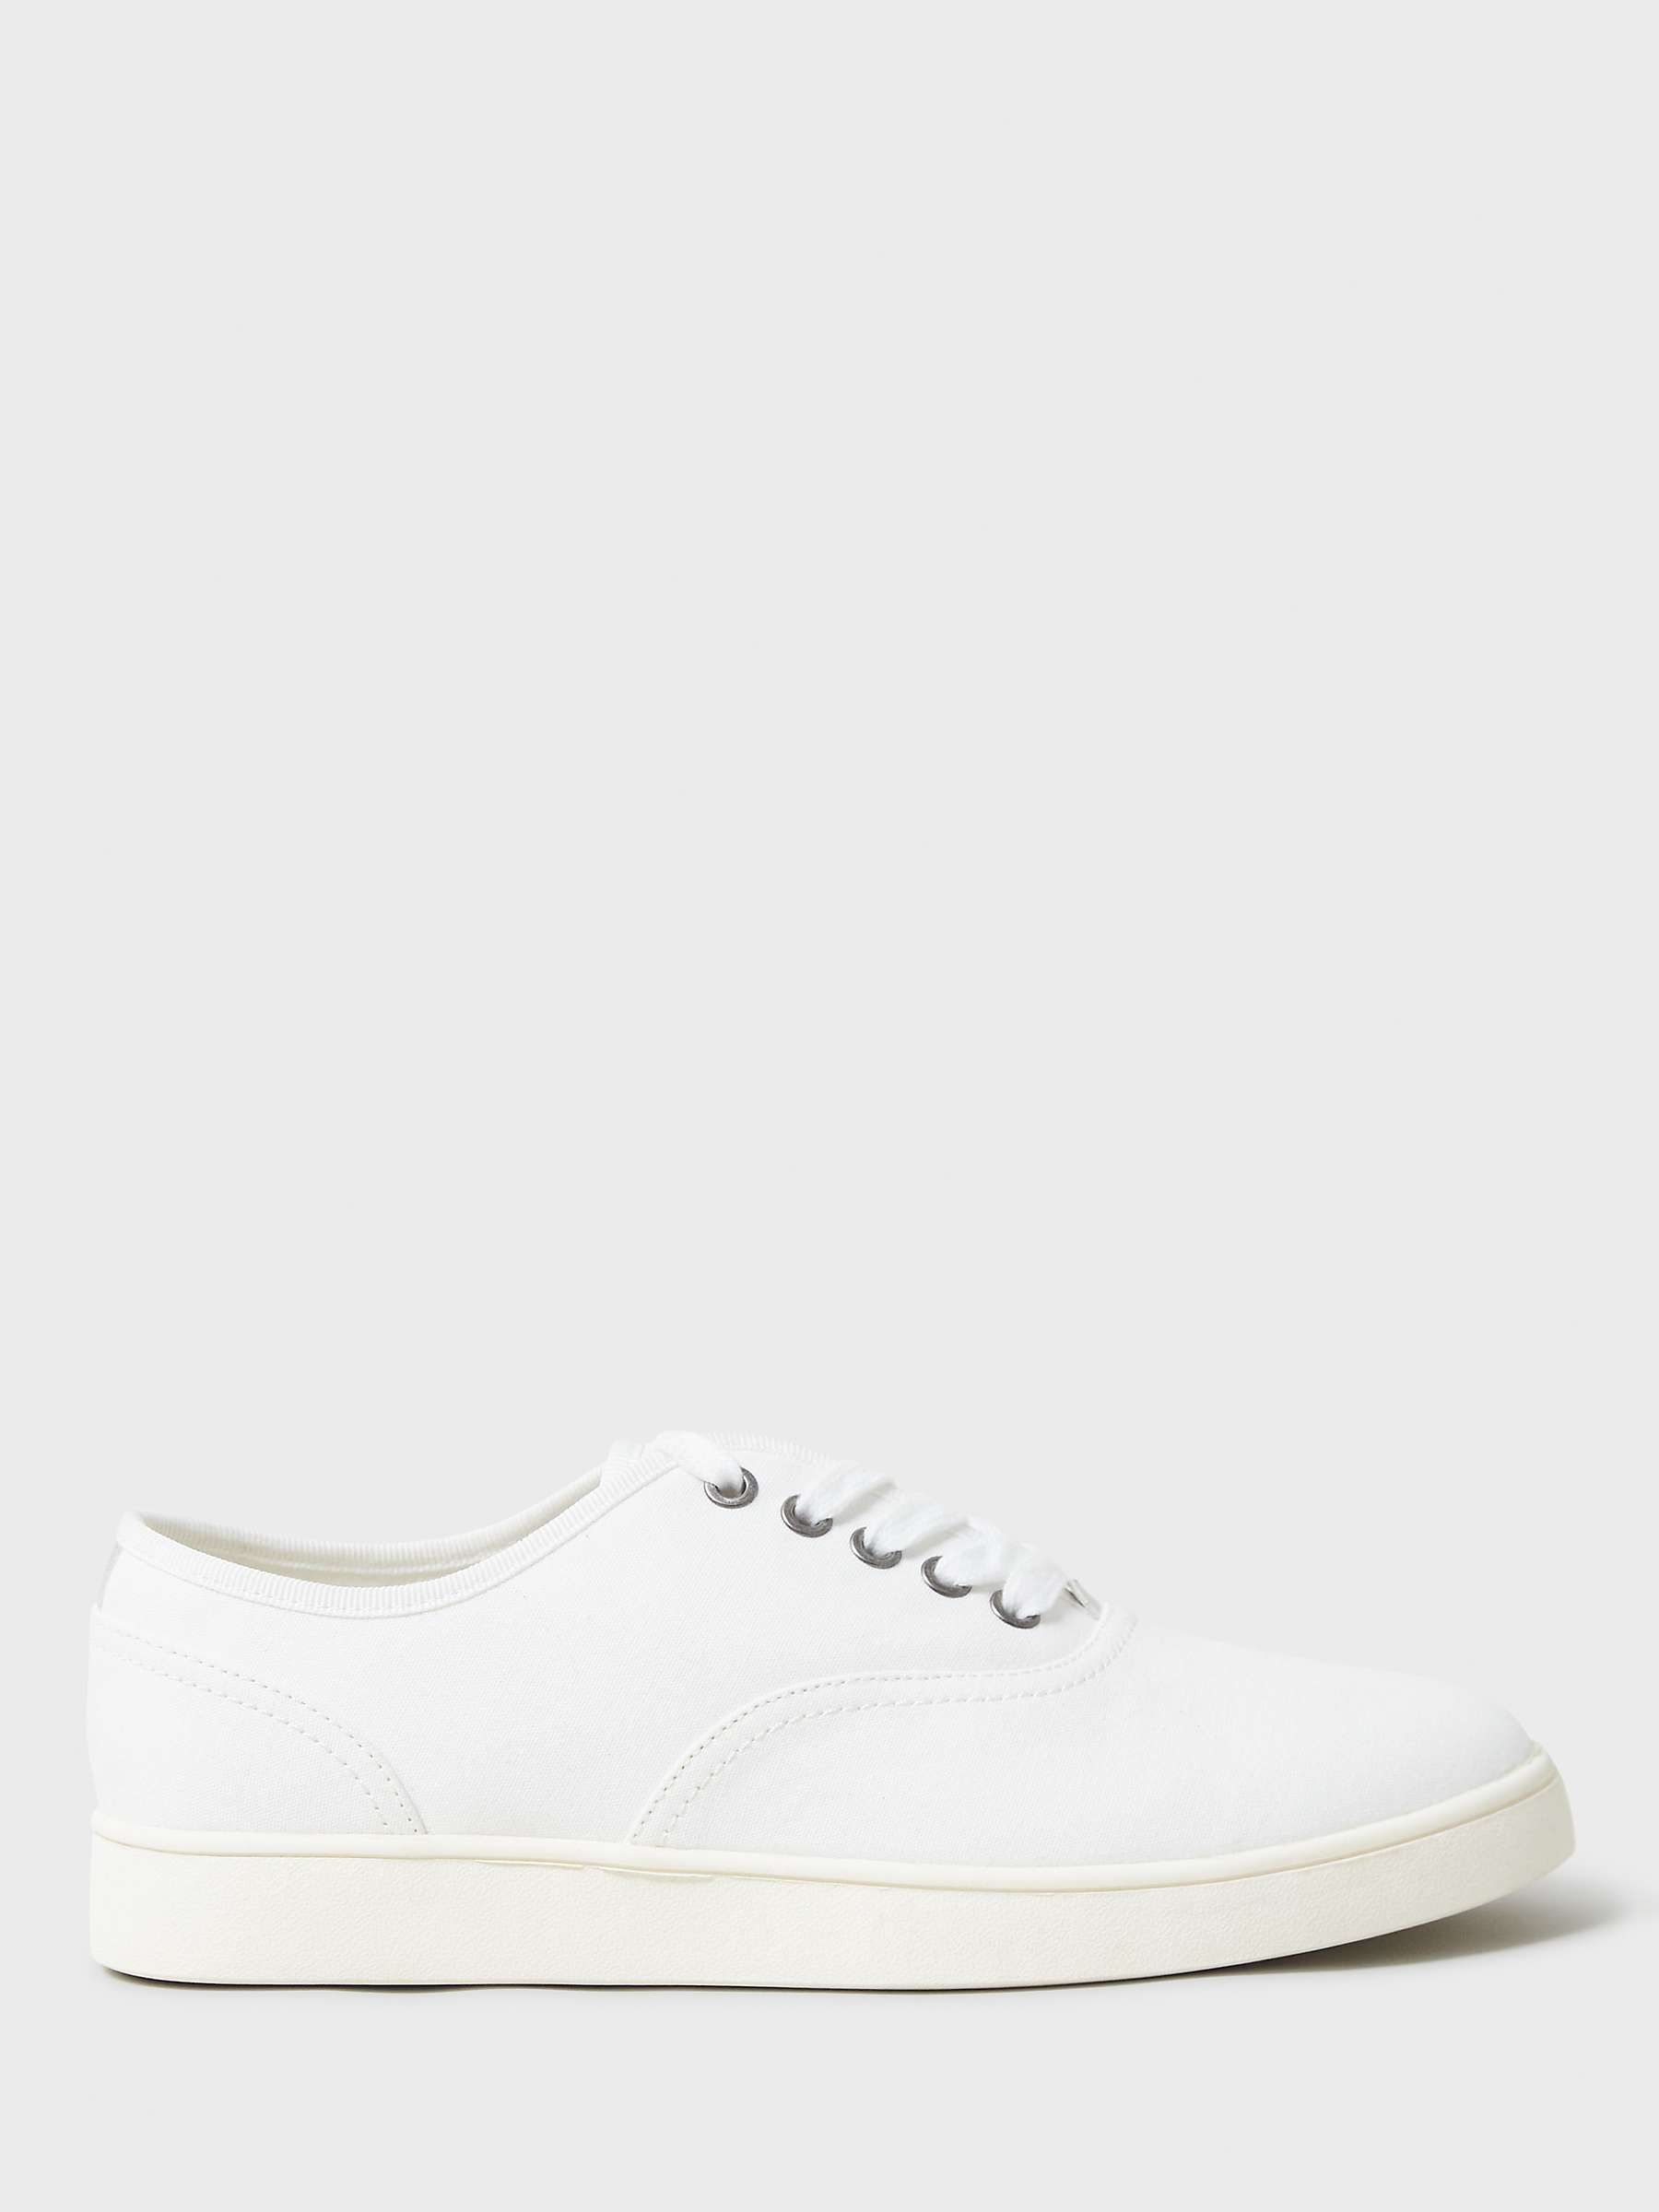 Buy Crew Clothing Canvas Oxford Trainers Online at johnlewis.com